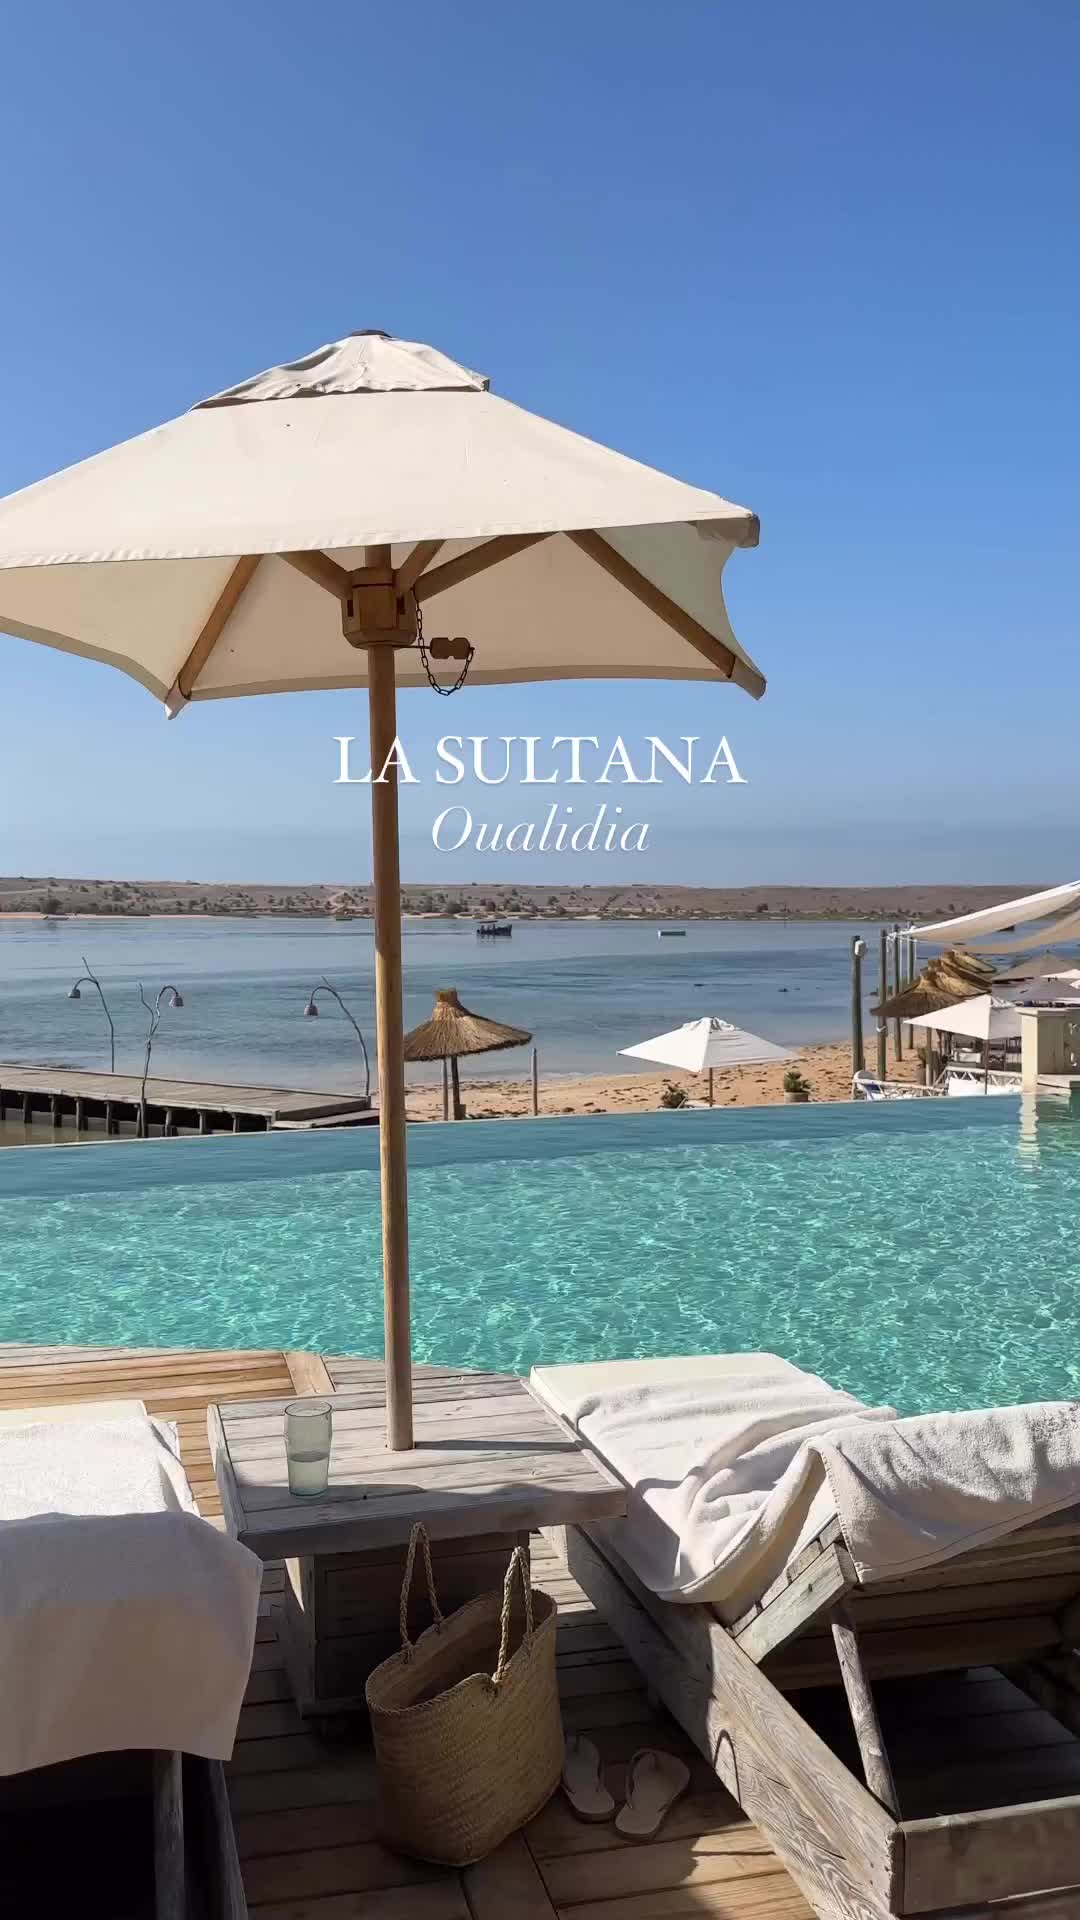 One of the most beautiful hotel 🤩
Located in front of the lagoon of Oualidia, this charming hotel has everything you need to relax and make unforgettable memories.

📍 @lasultanaoualidiaofficiel 

#lasultanaoualidia #hotelsandresorts #iamatraveler #forbestravelguide #beautifulhotels #hotelsoftheworld #hotelsofinstagram #oualidia #hotelwithaview #slowlivinghotels #dreamyresorts